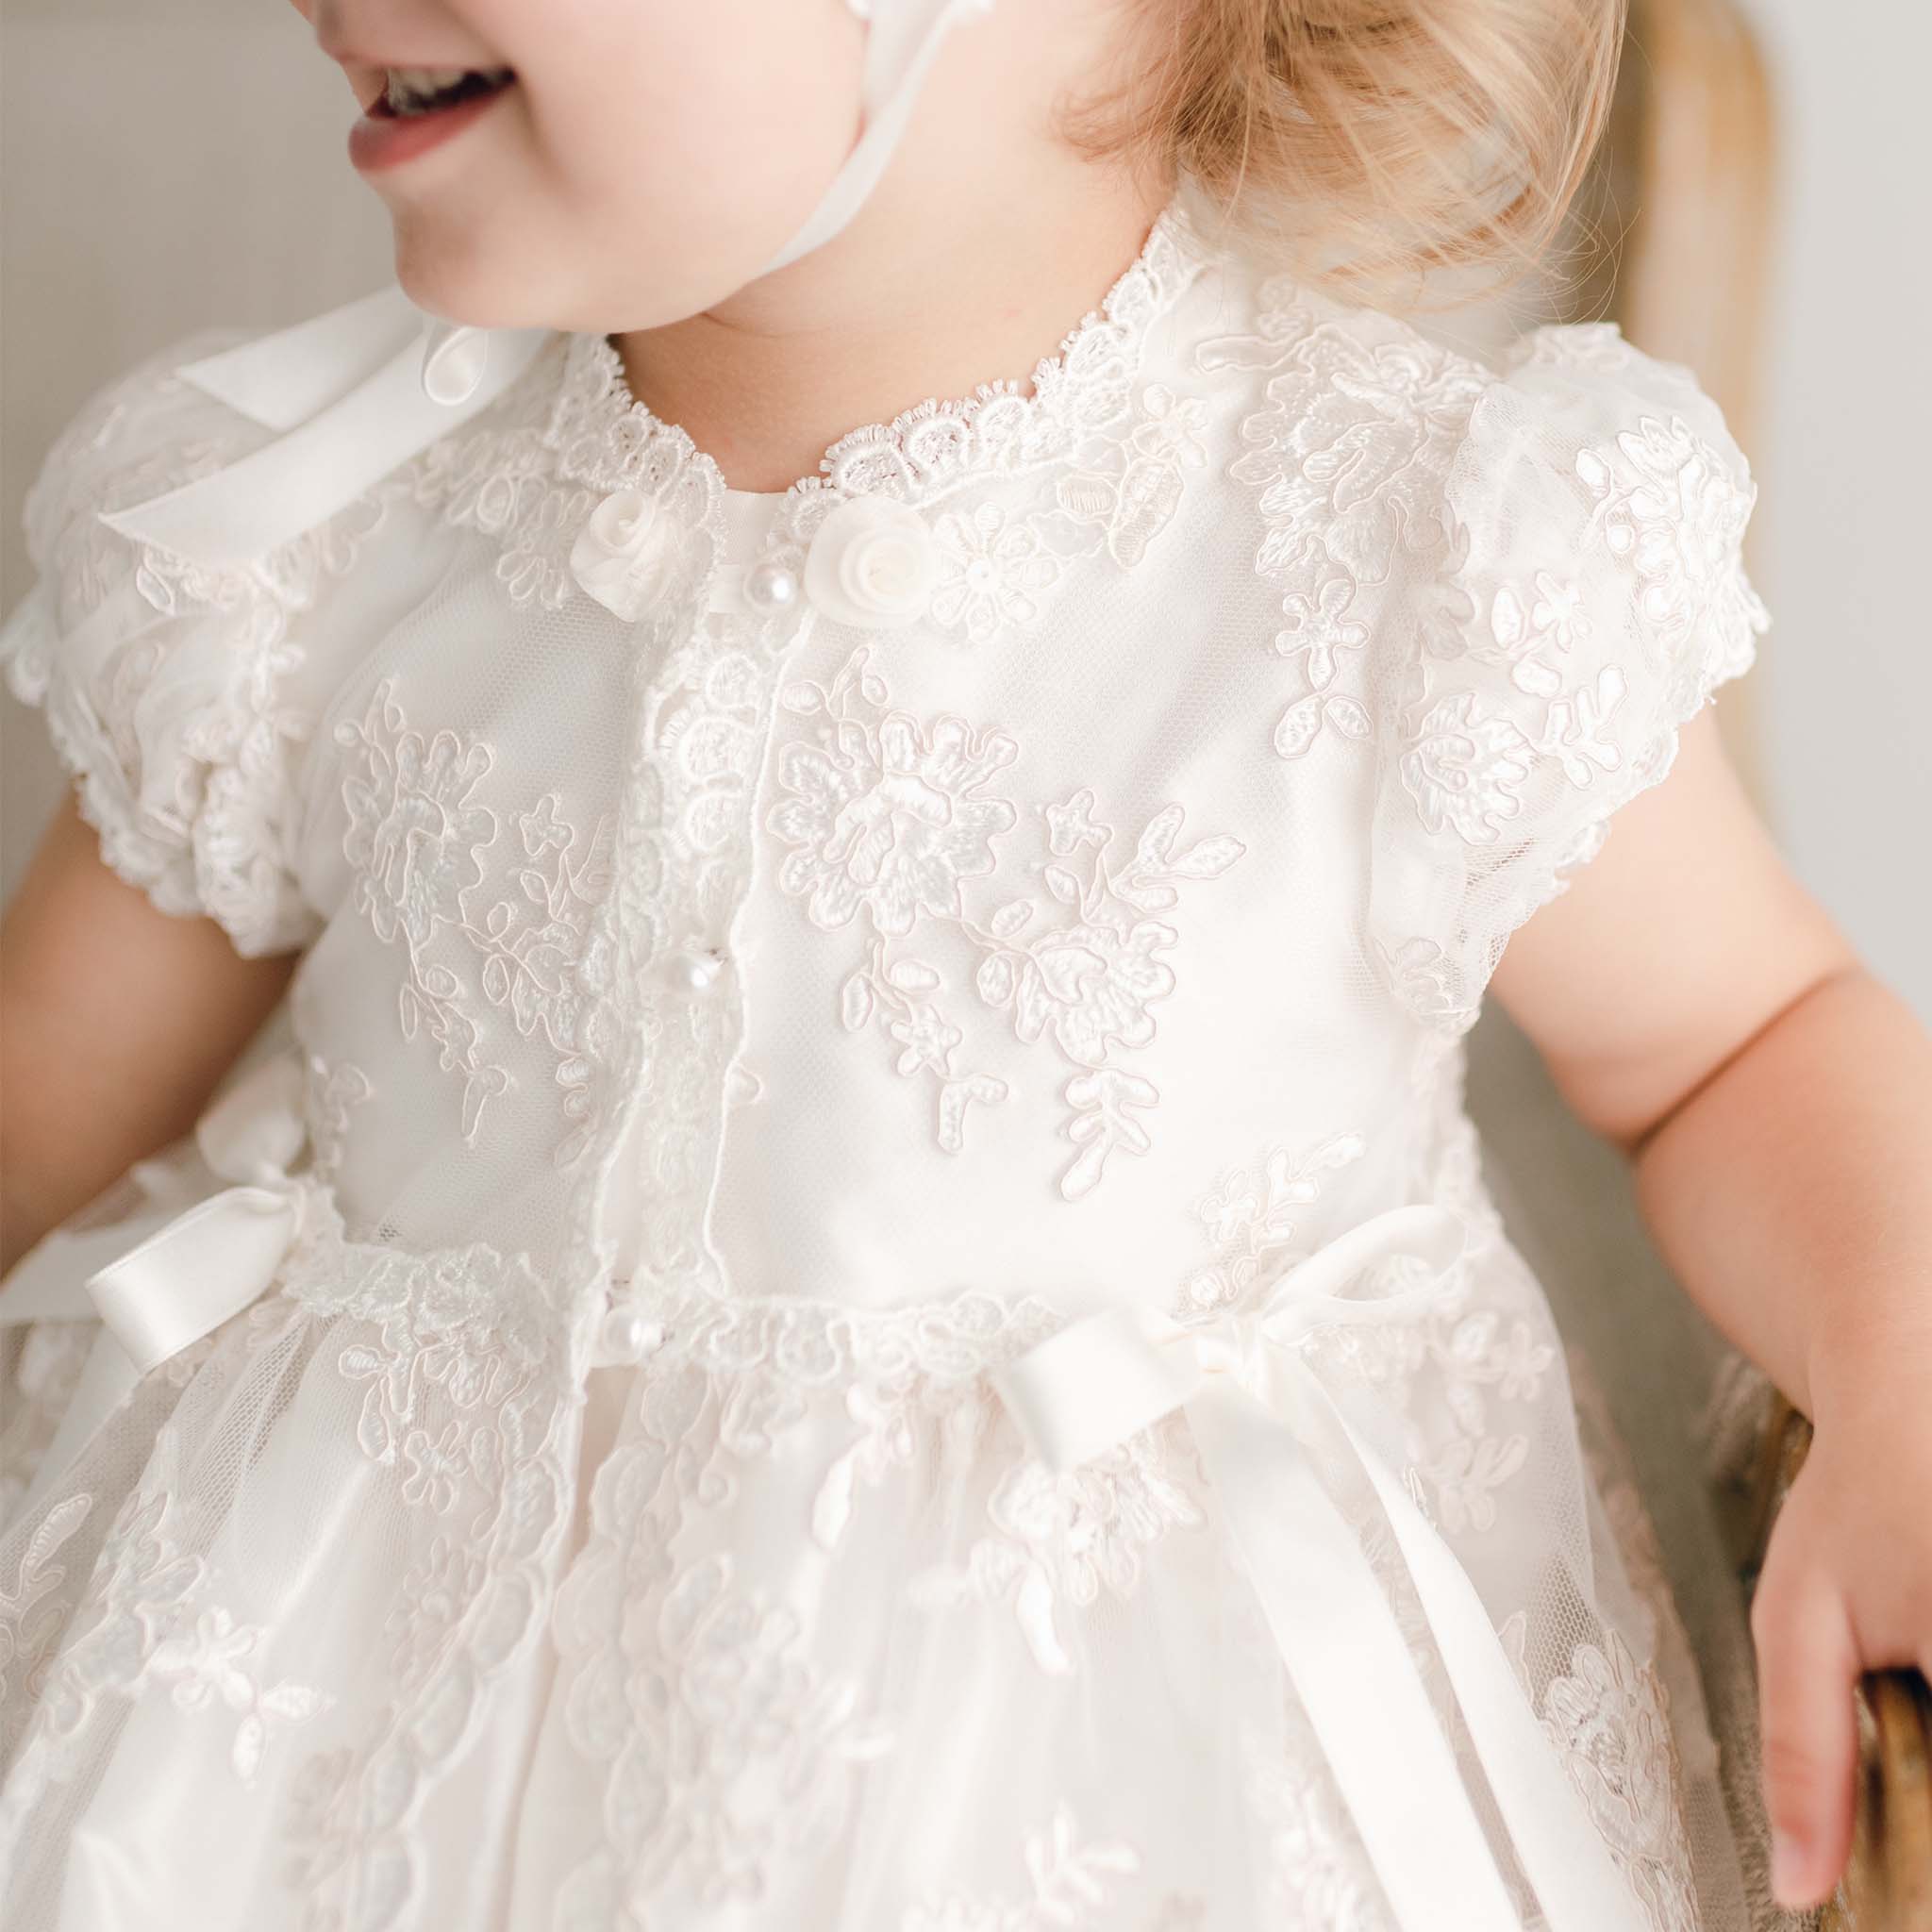 Elegant Lace Christening Gowns For Baby Girls: Short Sleeved, Jewel Neck,  With Ribbon Sash From Manweisi, $71.76 | DHgate.Com